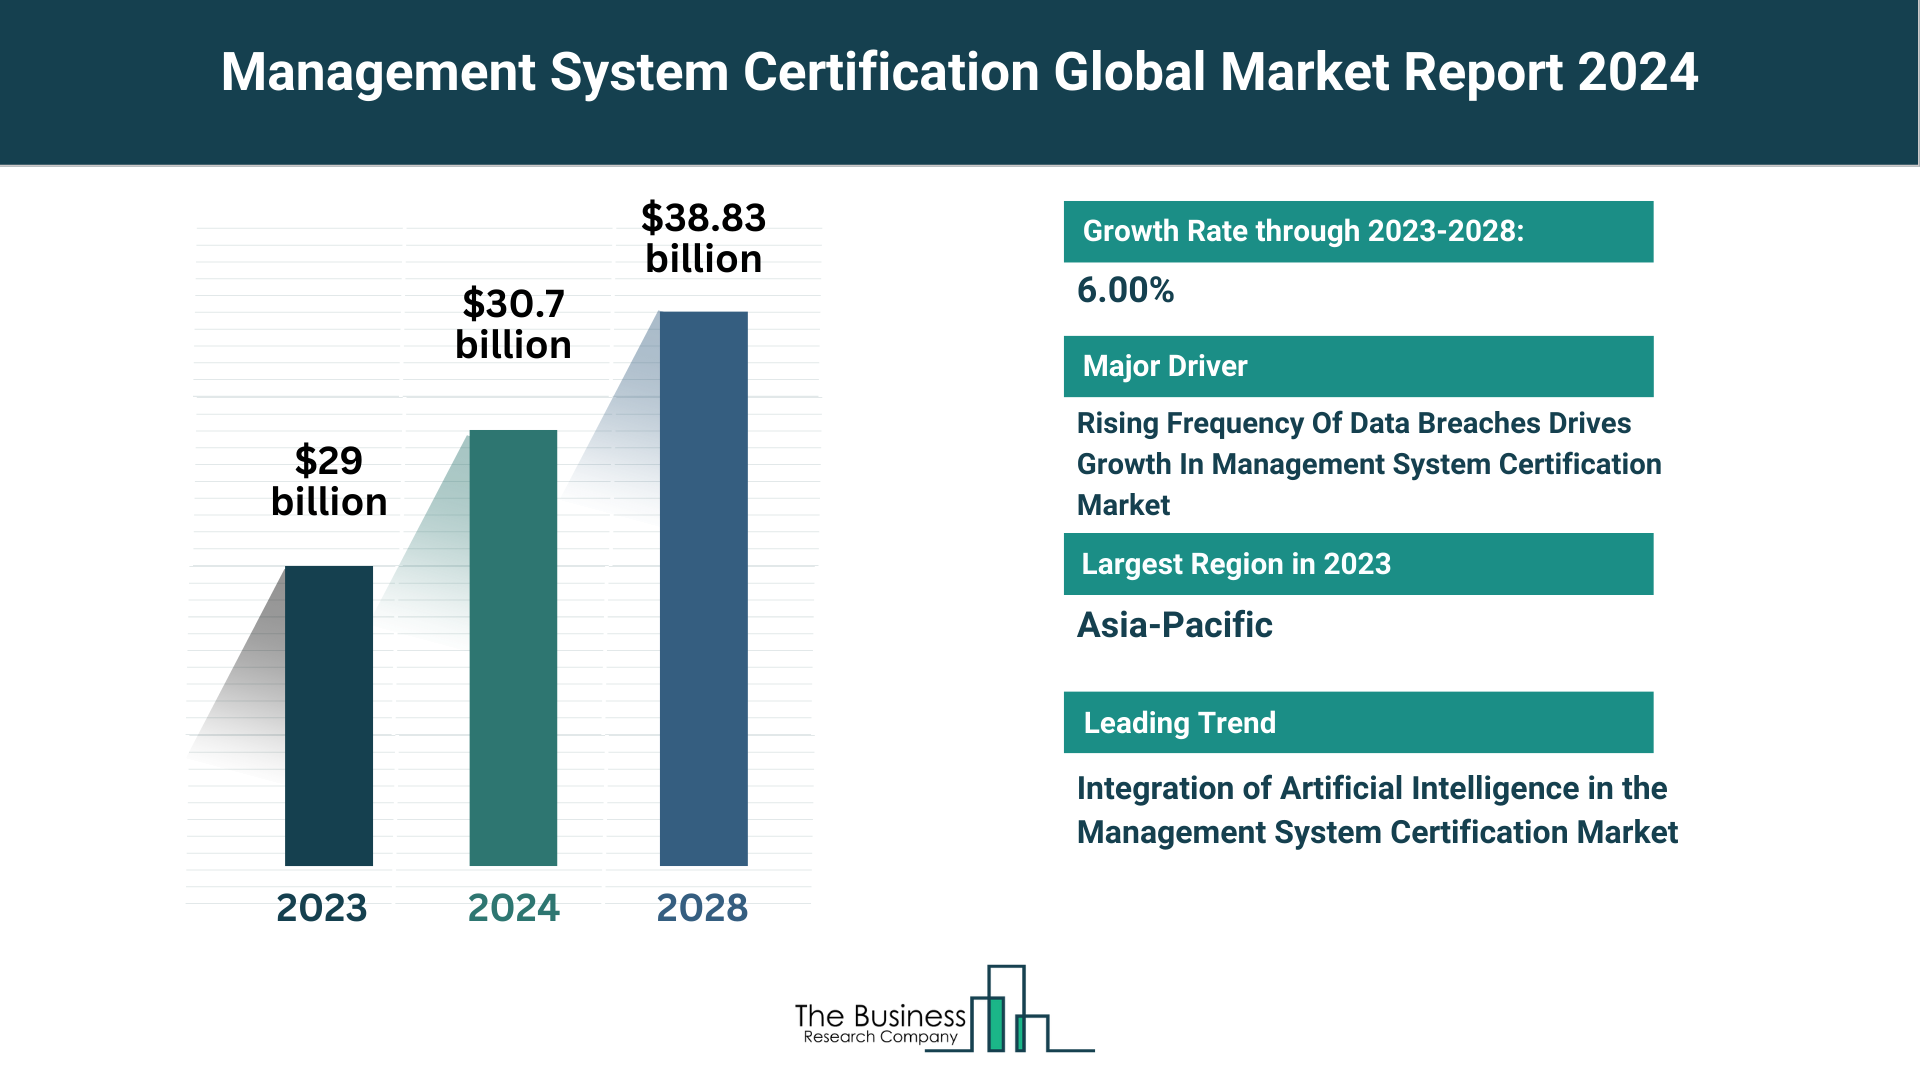 Global Management System Certification Market Report 2024: Size, Drivers, And Top Segments